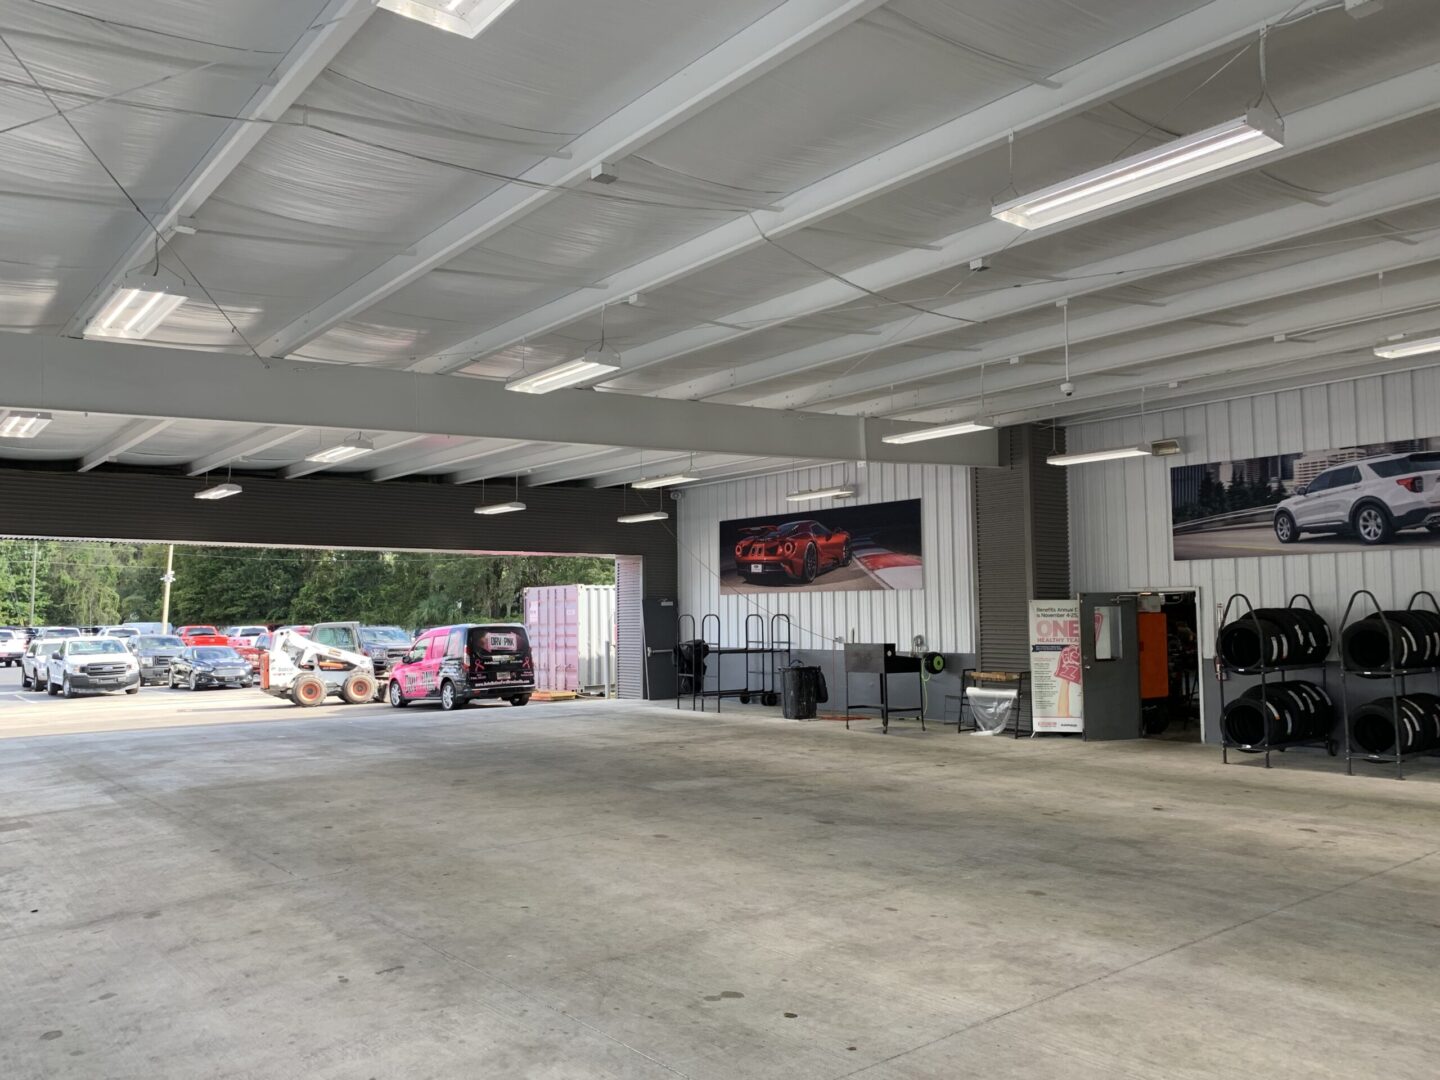 A large empty garage with lots of cars parked in it.